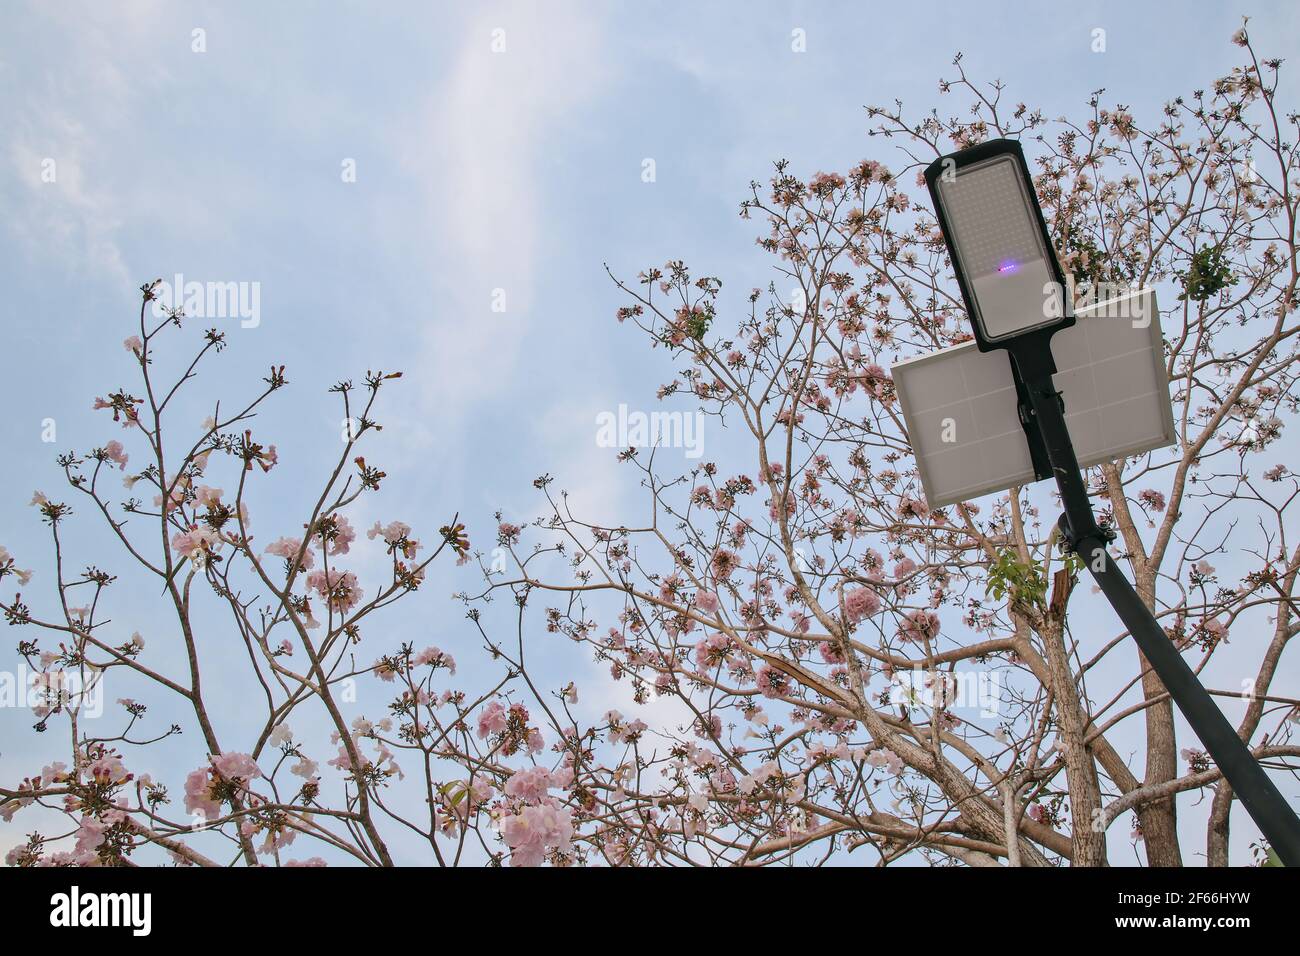 Ready to use solar cells. With a beautiful blossoming Phaya Sua Krong flower as a background, the concept of nature and technology can coexist. Stock Photo